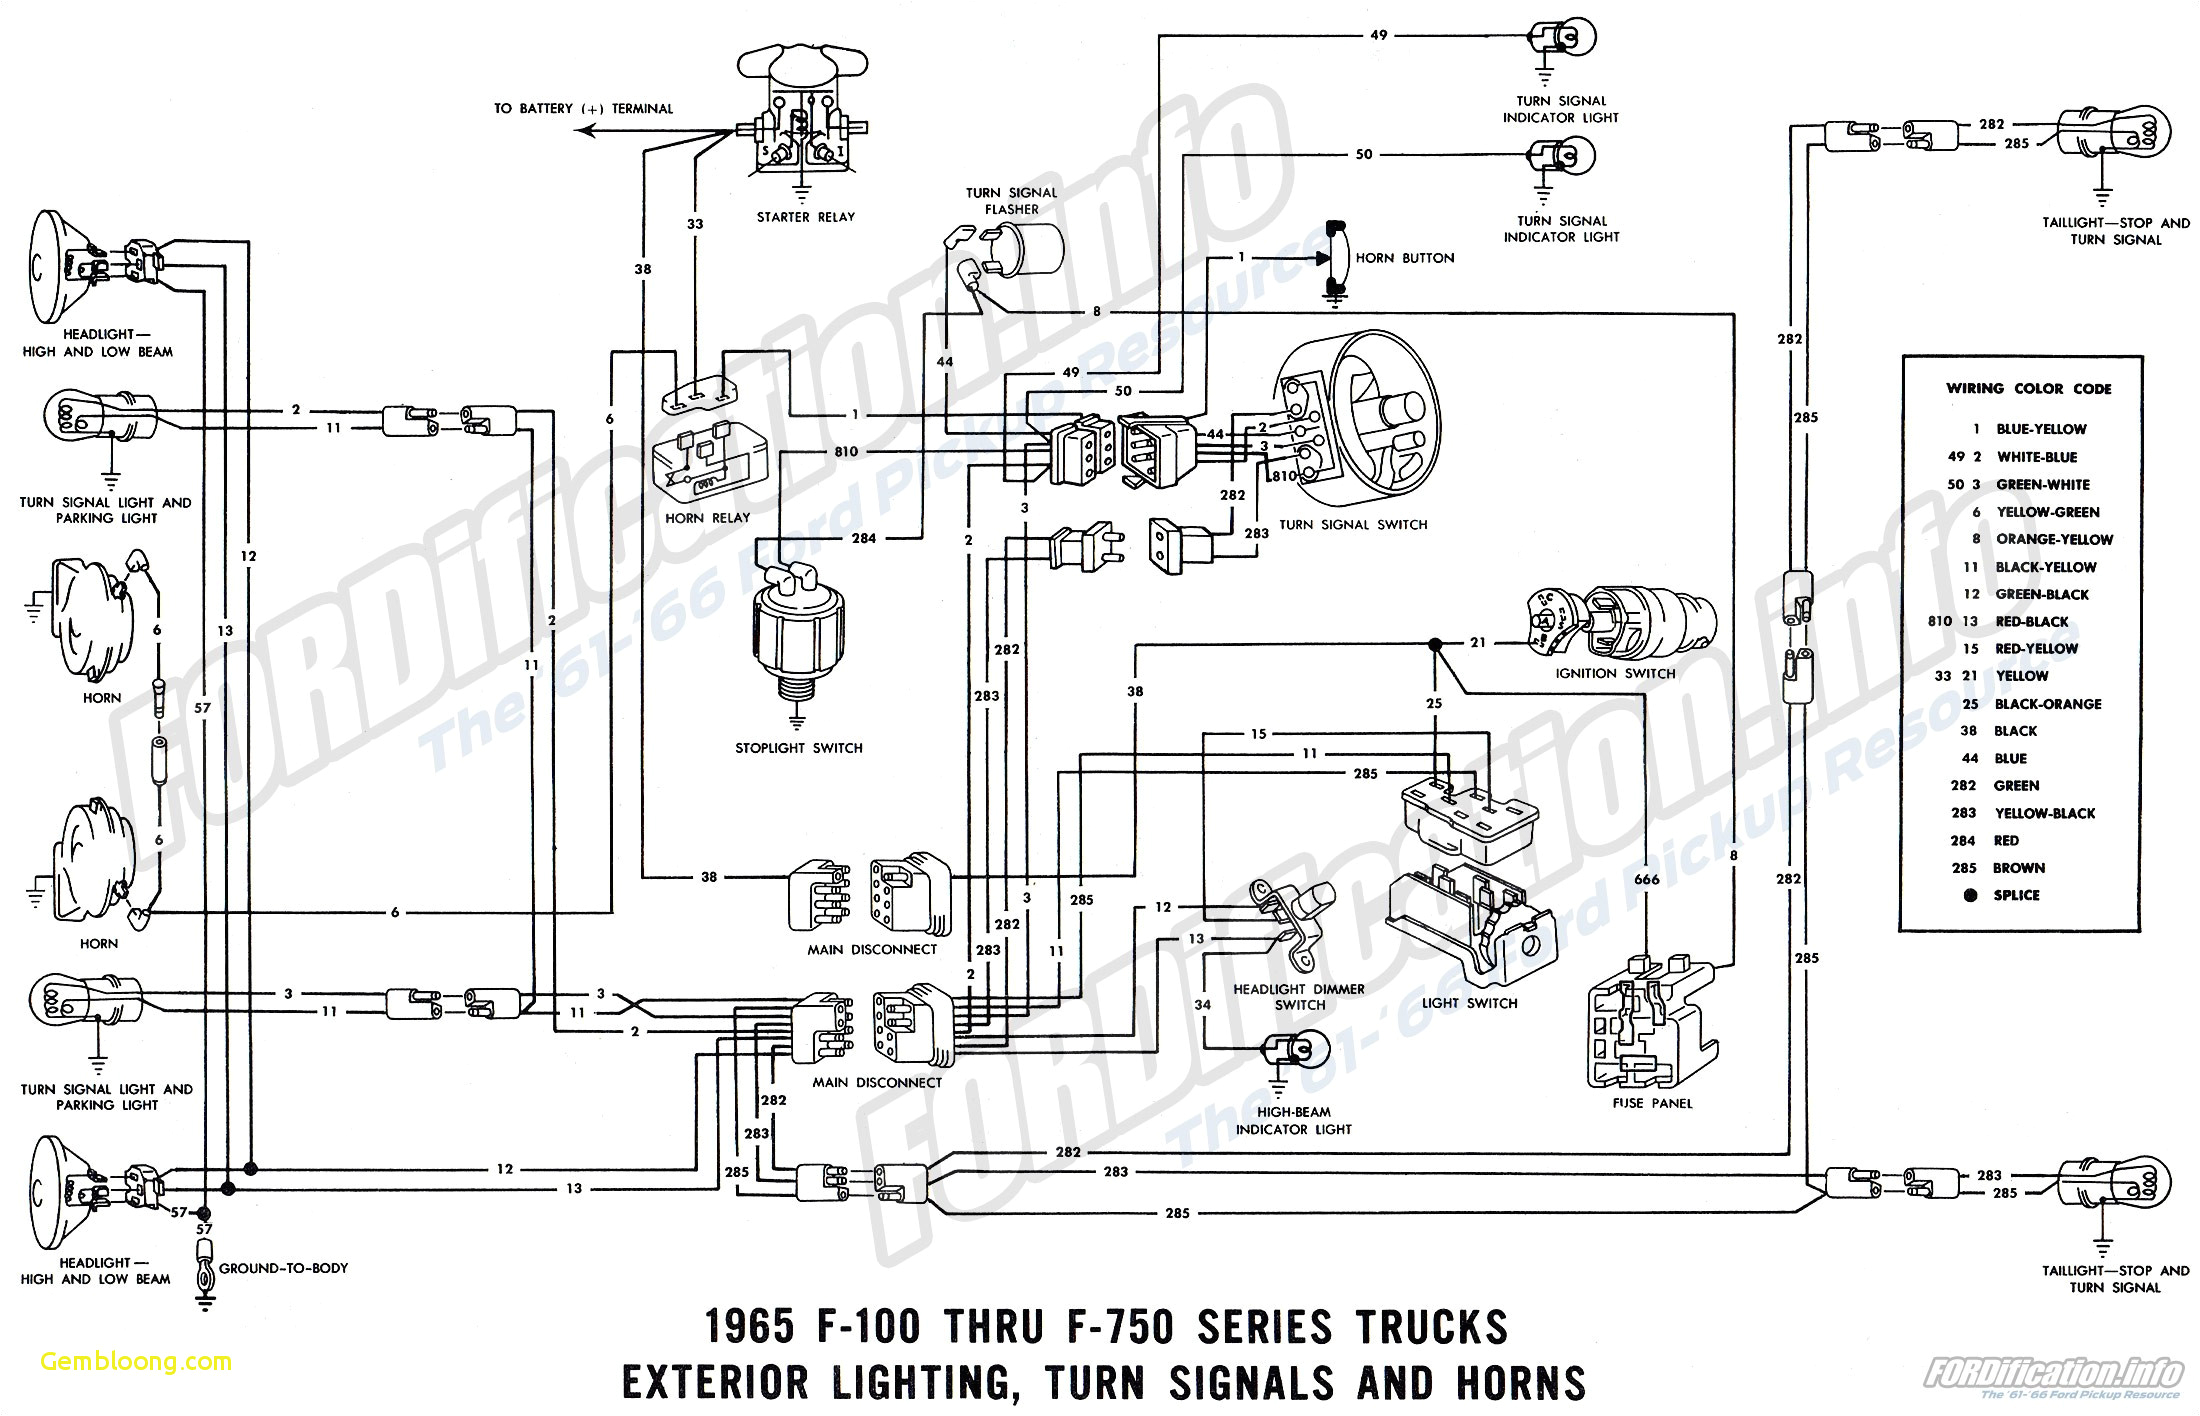 picture of ford wiring diagram 1966 ford ignition wiring diagram online wiring diagram 1997 ford f350 wiring schematic 1966 ford f100 wiring schematic jpg